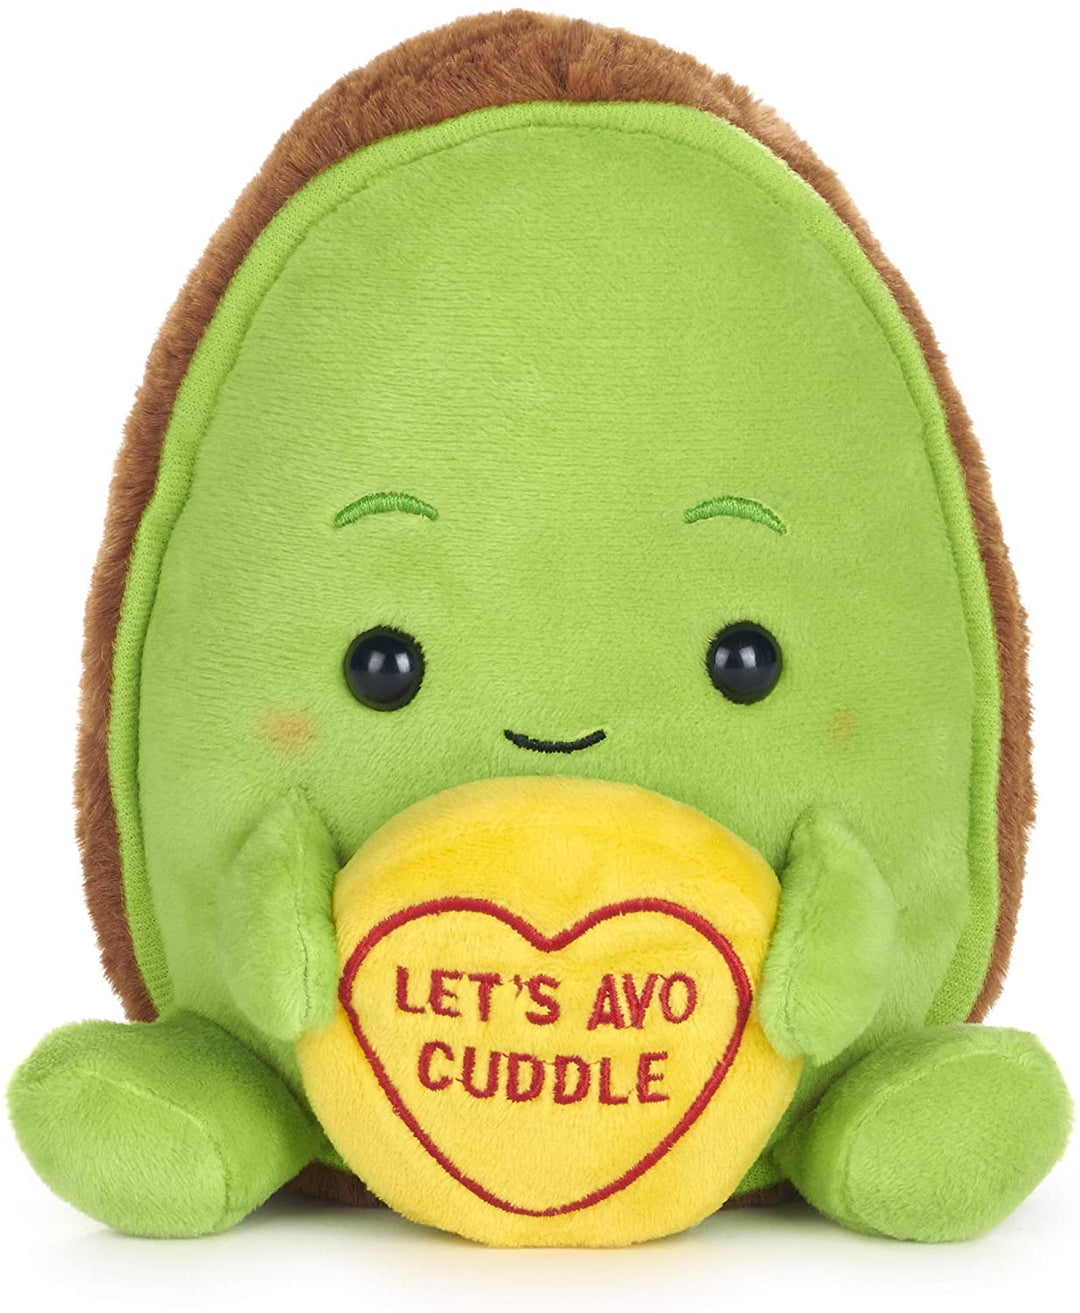 Posh Paws 37333 Swizzels Love Hearts 18cm Avocado Let's Avo Cuddle Message Soft Toy, Green